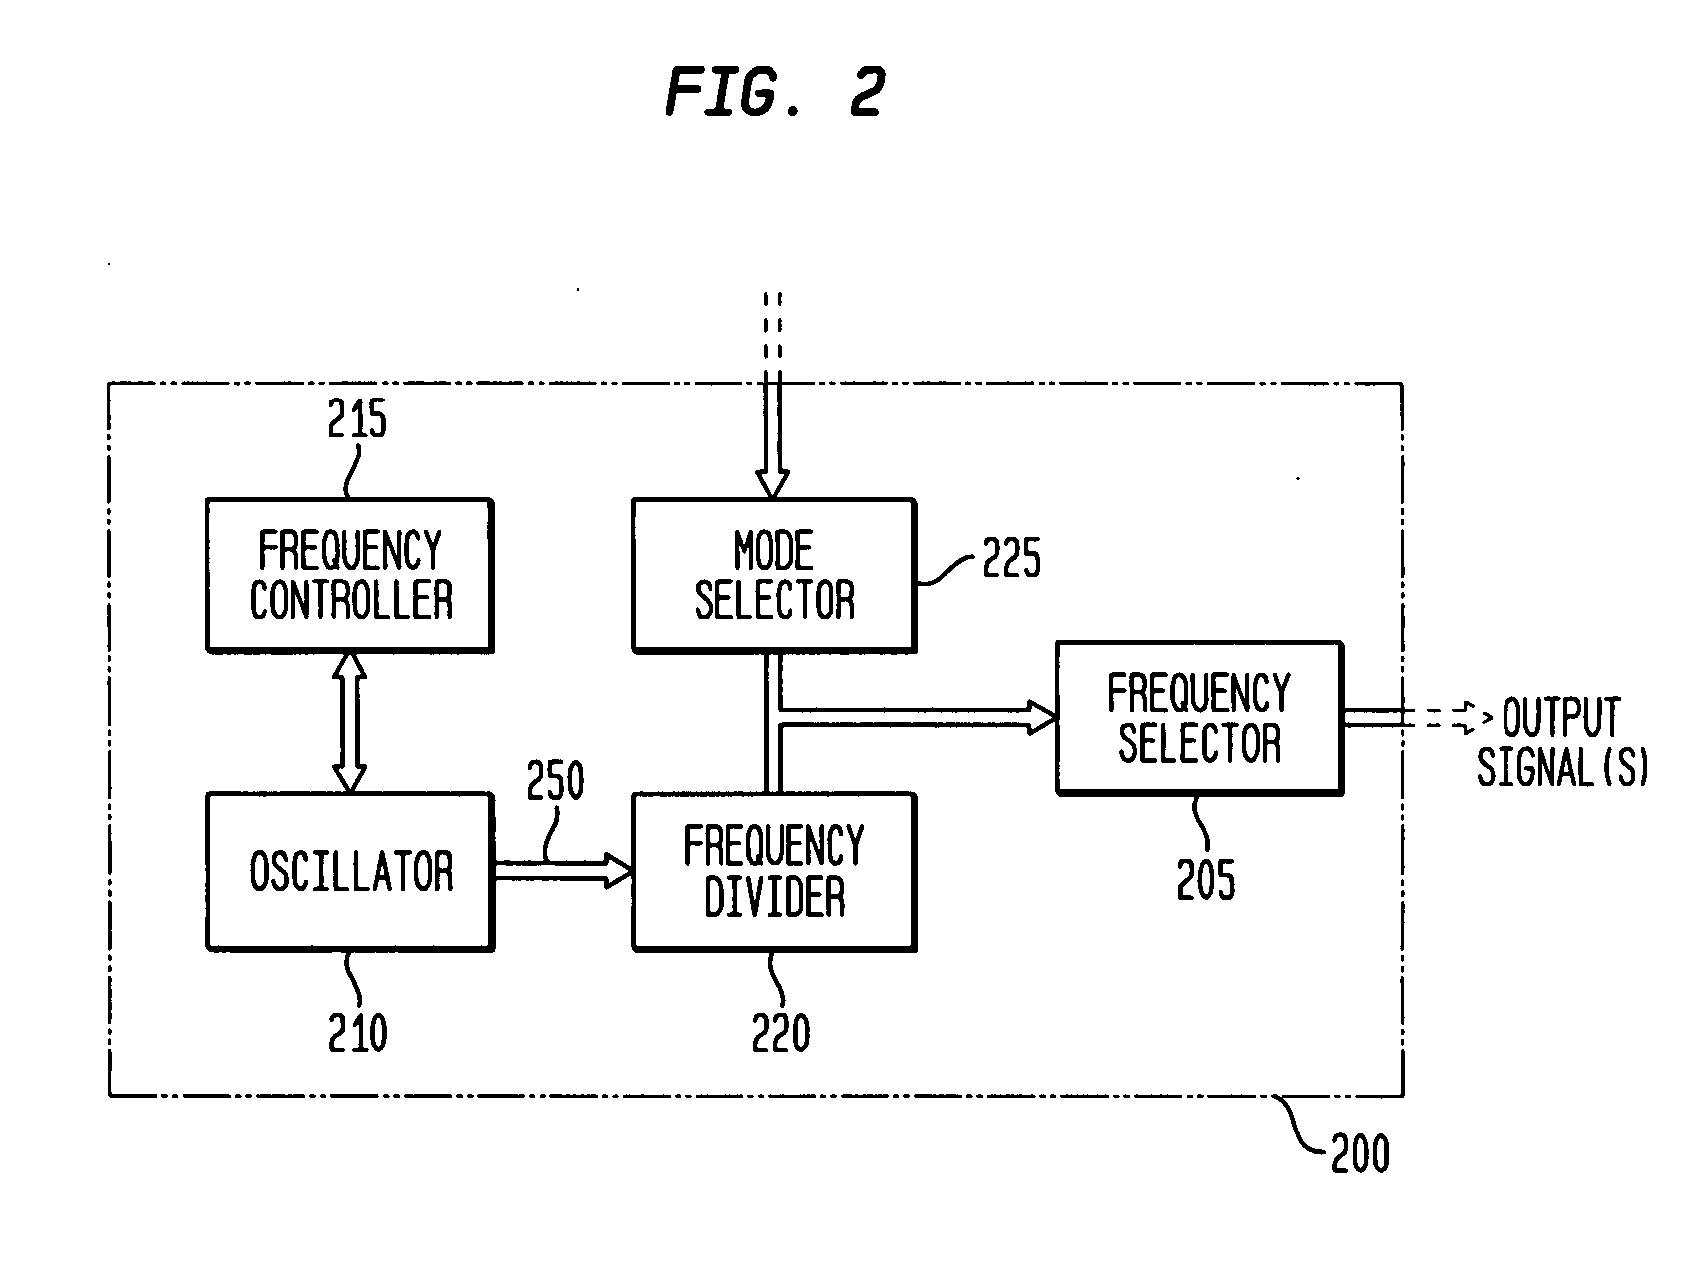 Multi-terminal harmonic oscillator integrated circuit with frequency calibration and frequency configuration